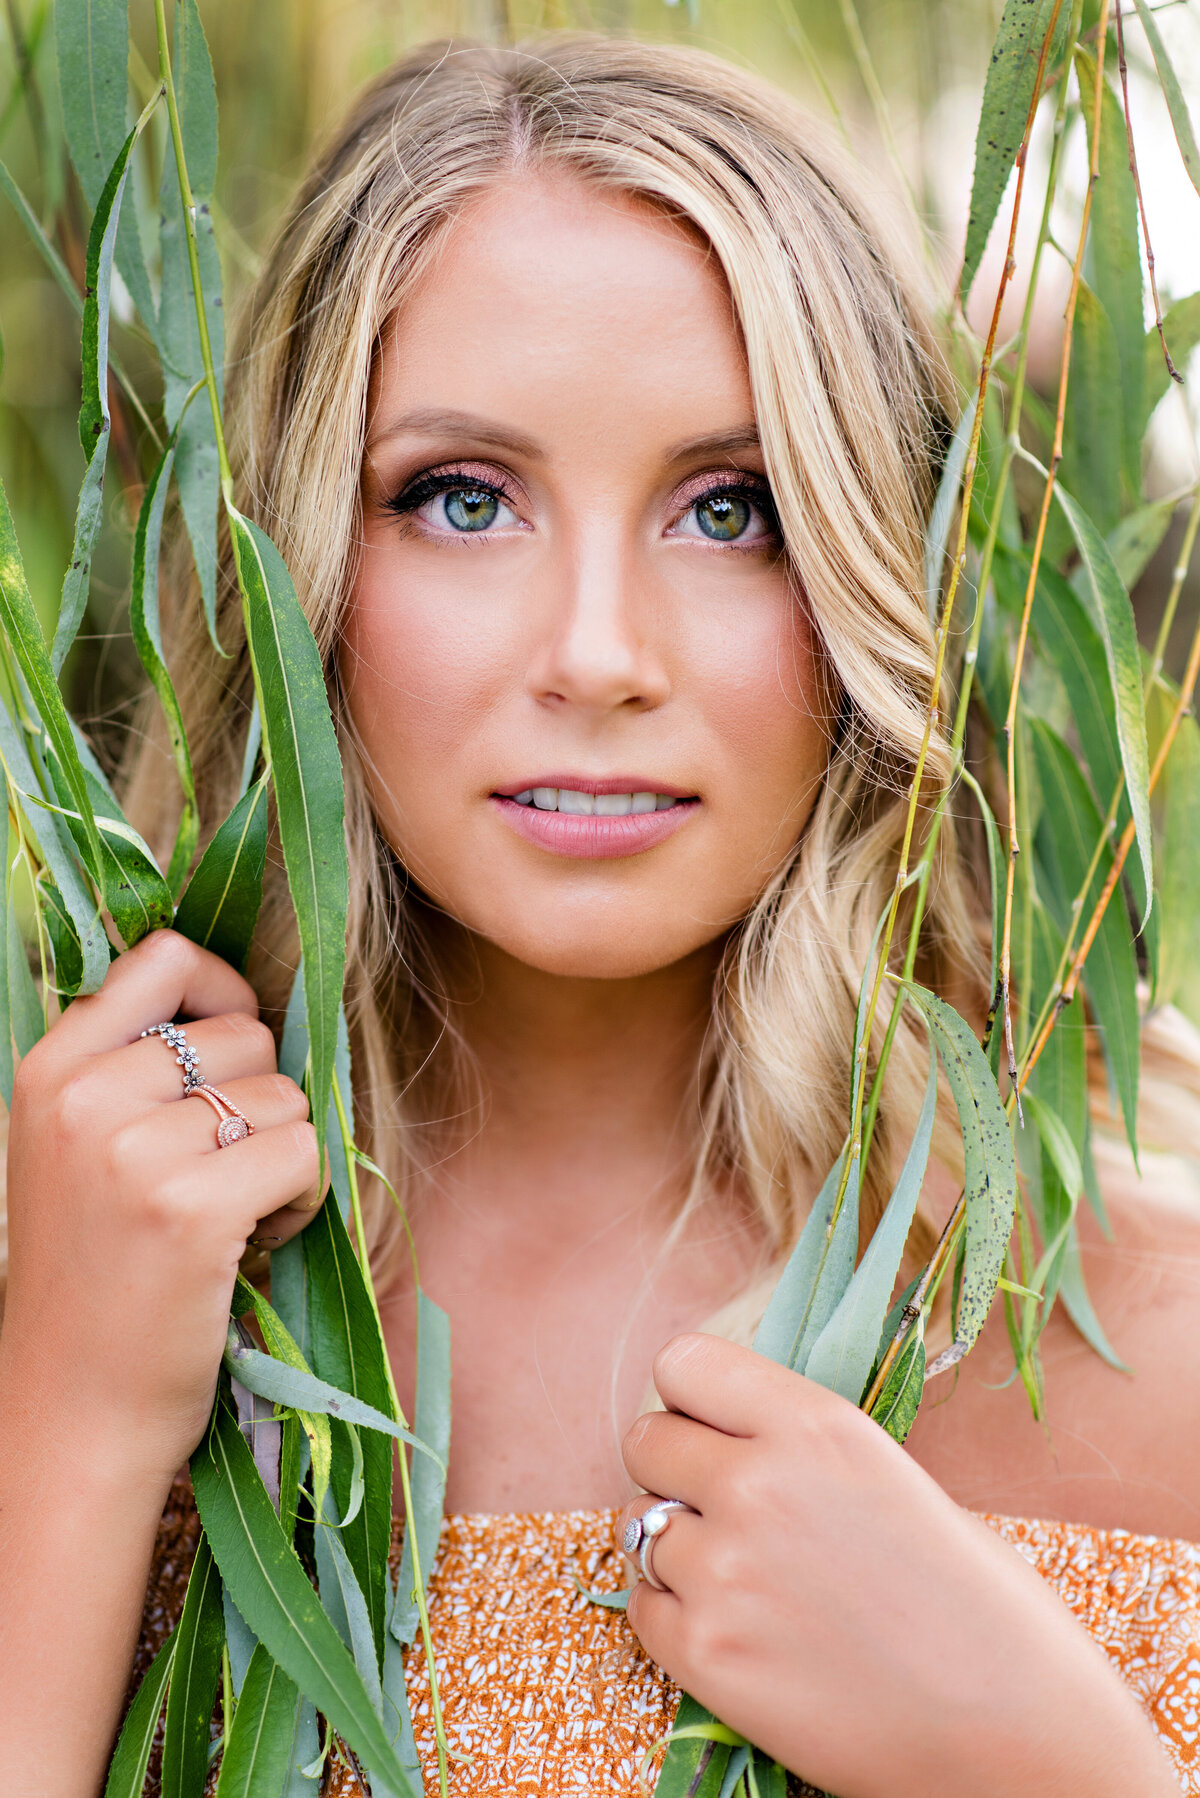 High school senior girl poses in willow tree at Amber Grove venue for her high school senior portrait session.